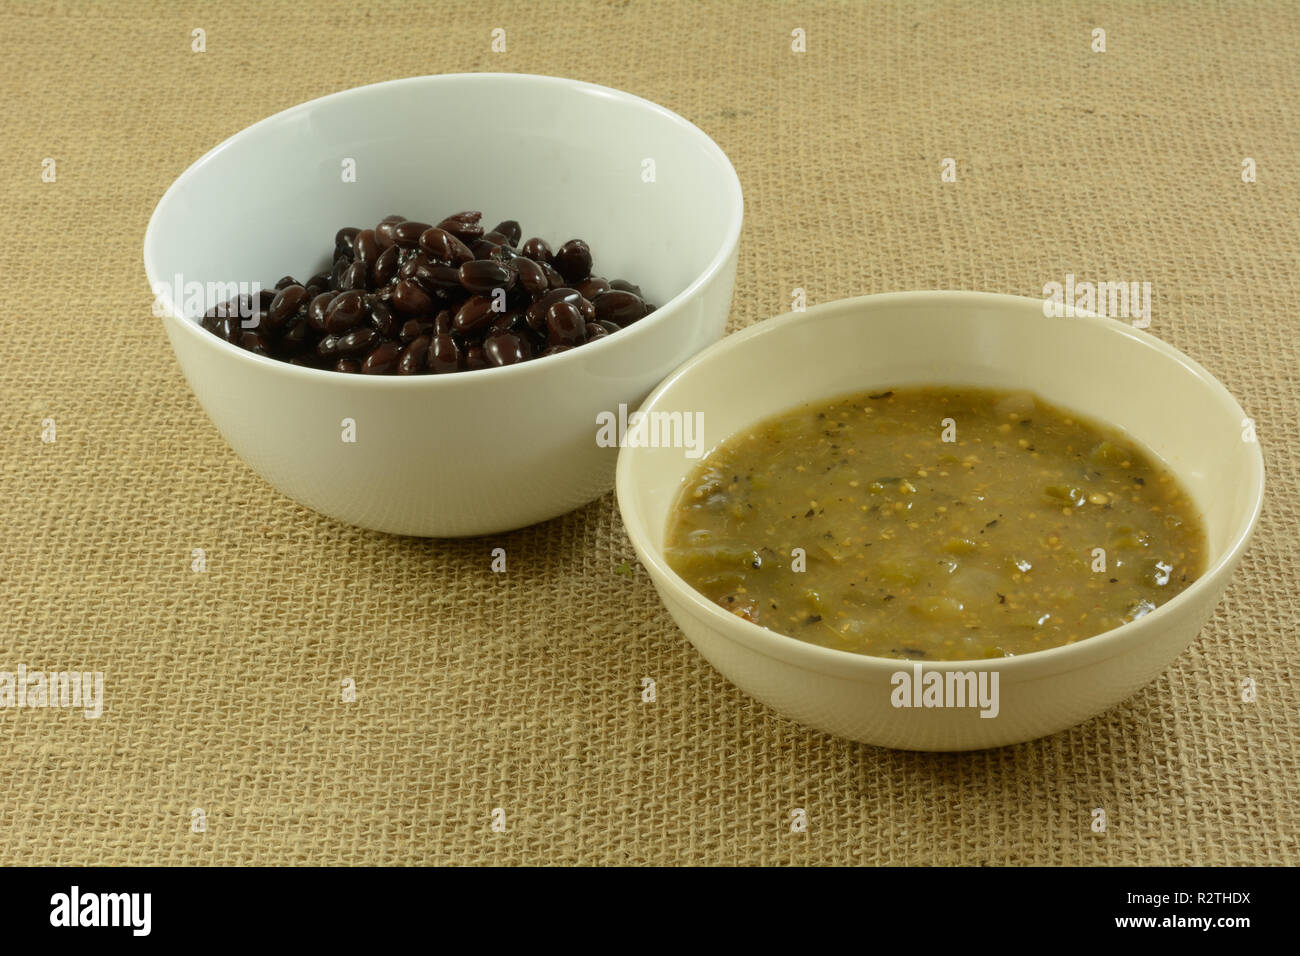 Ingredients for making Mexican food of black beans and salsa verde in white bowls Stock Photo